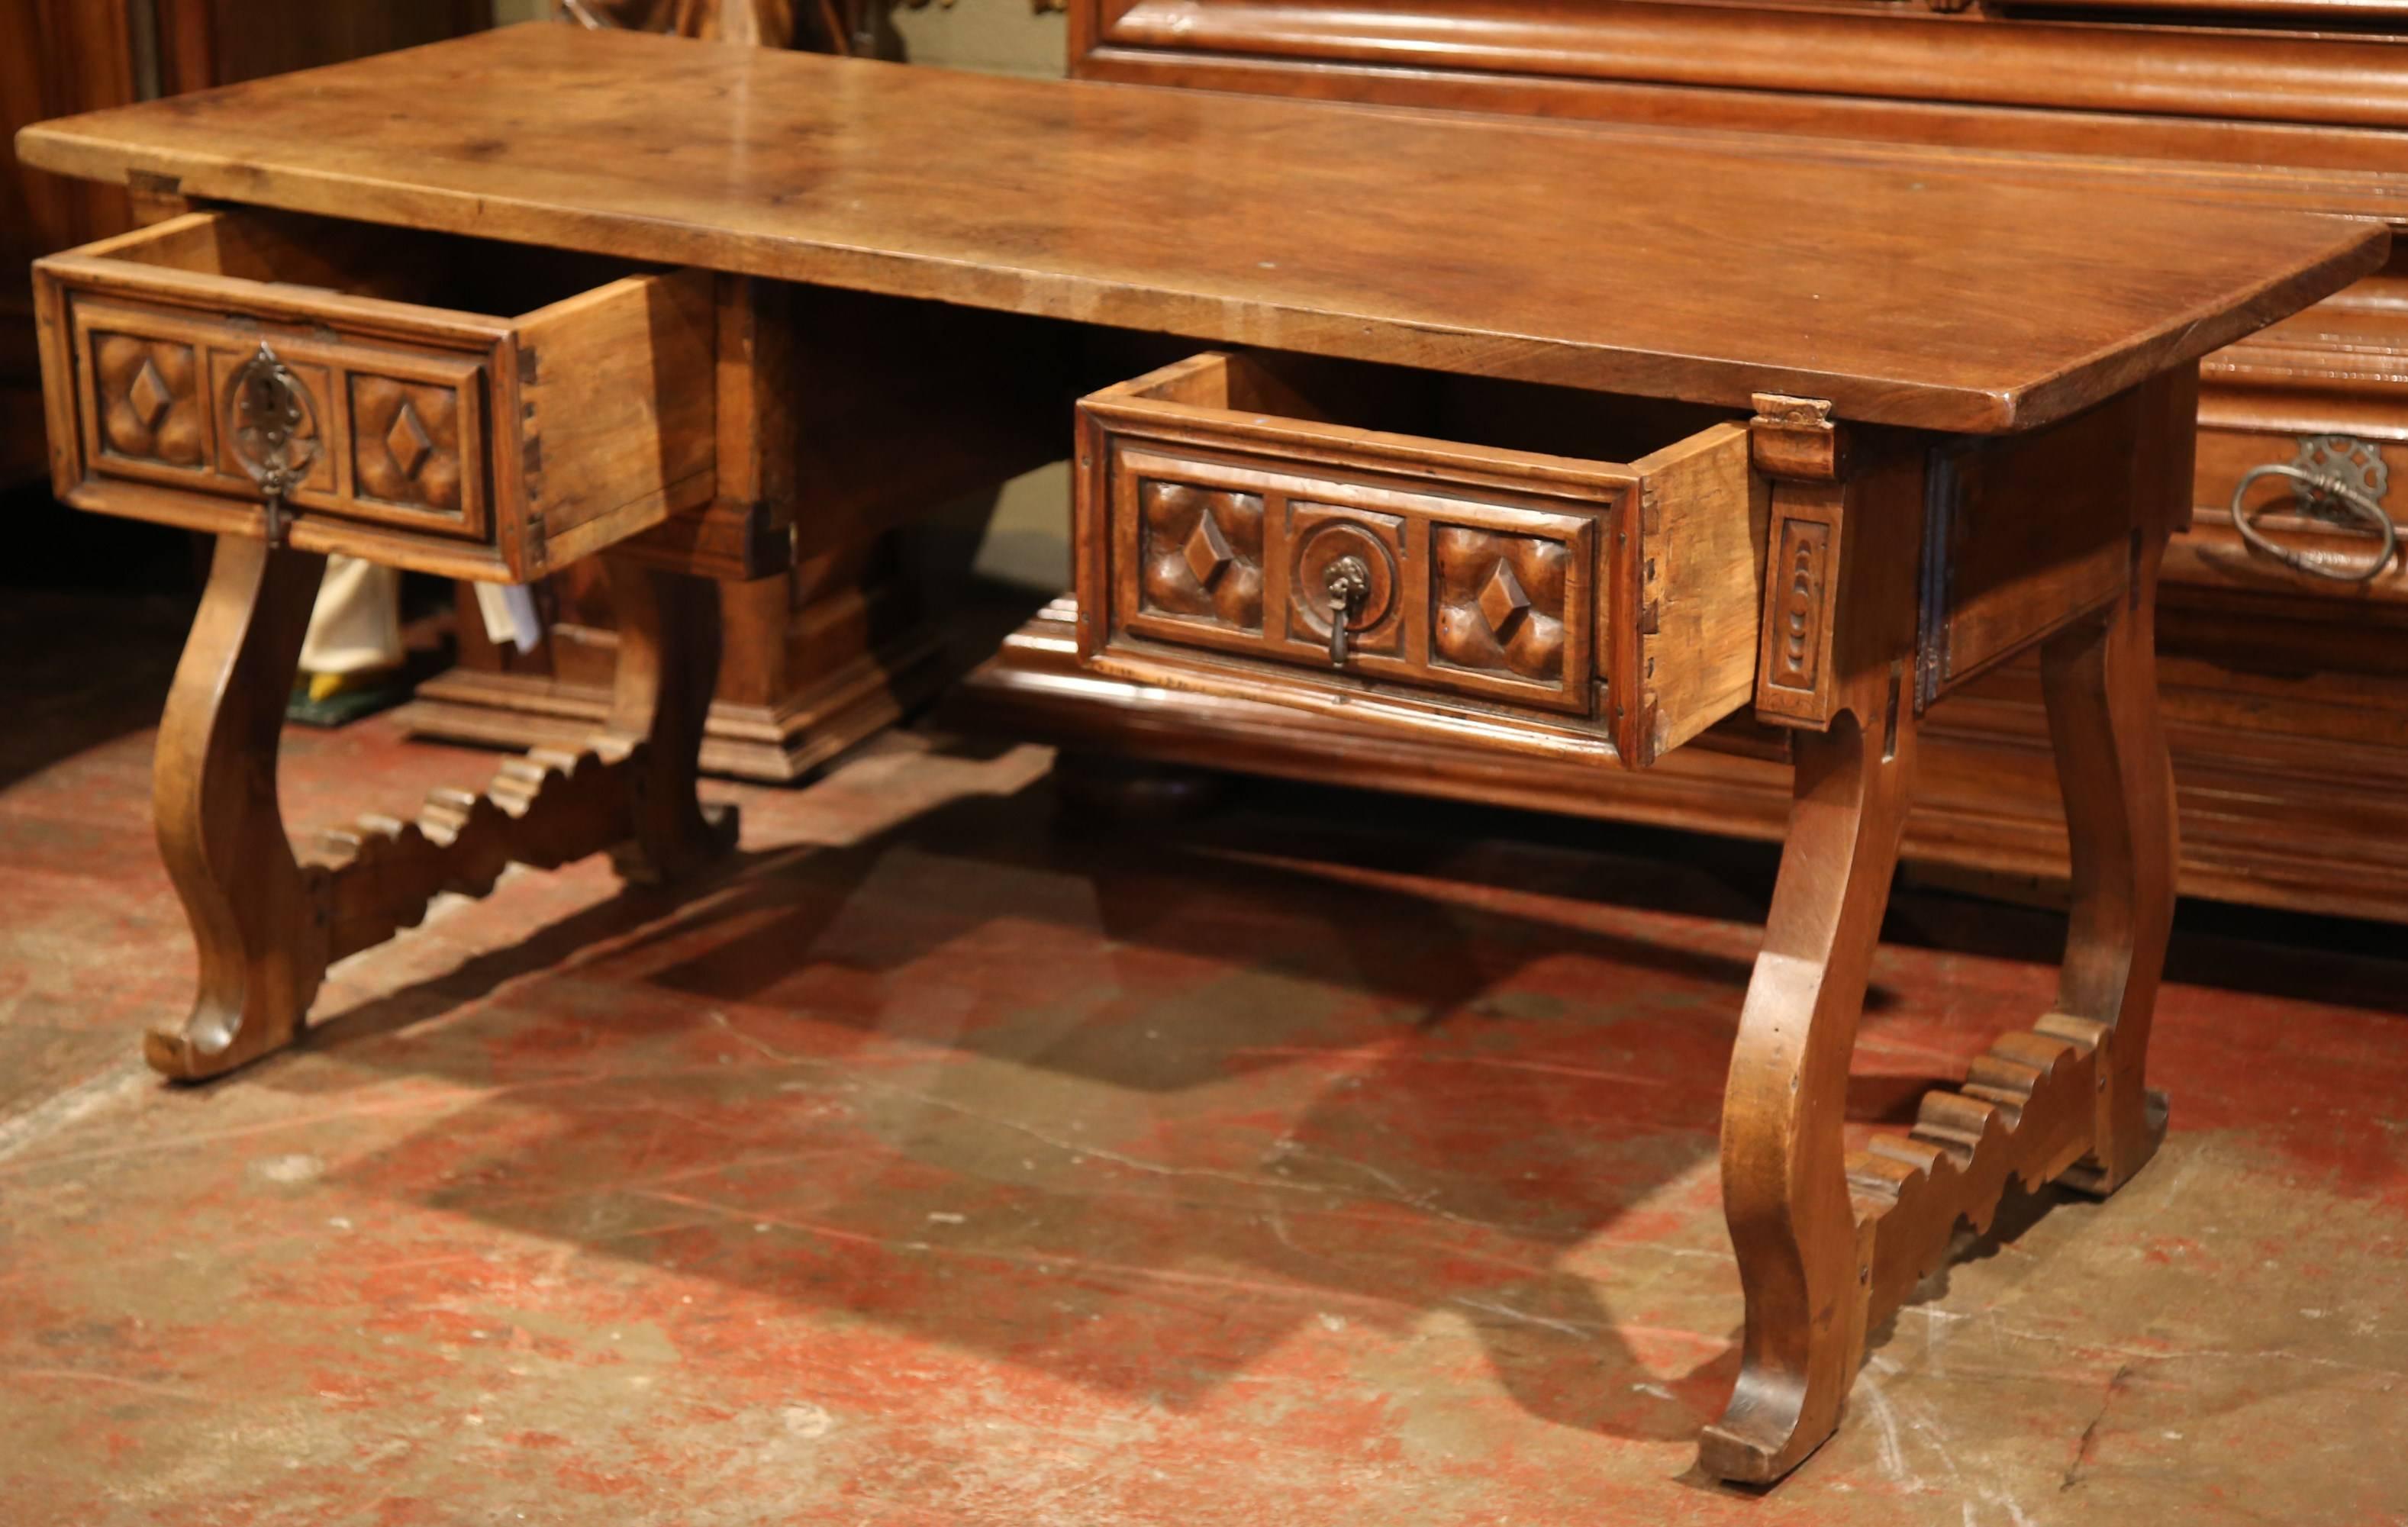 Hand-Carved 19th Century Spanish Carved Walnut Desk with Drawers and Single Plank Tabletop